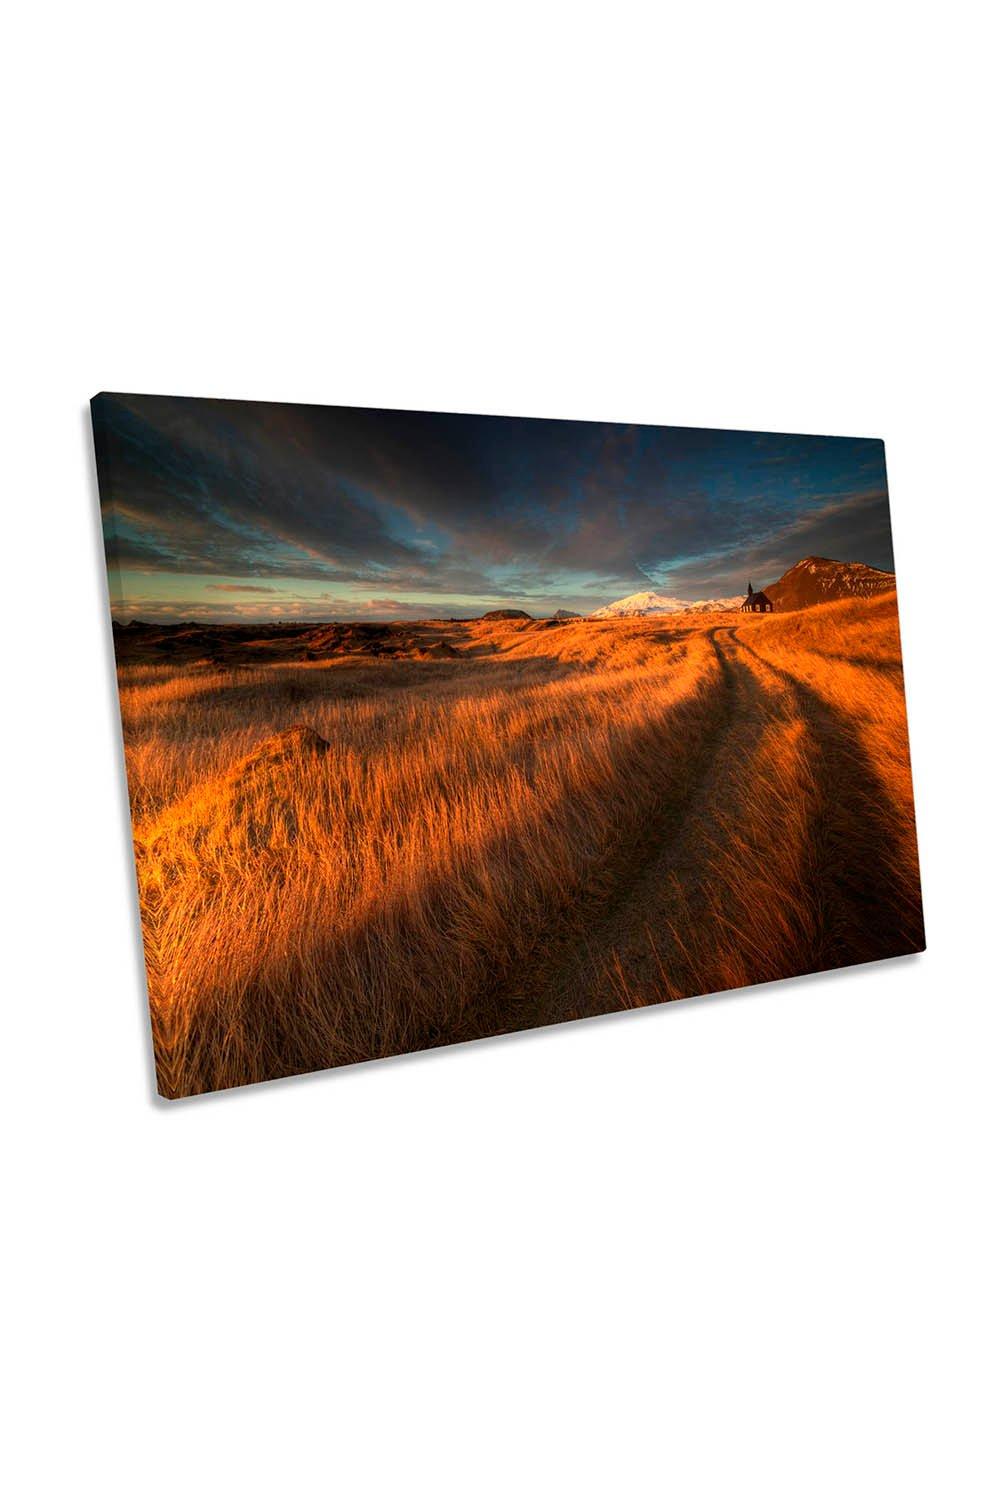 The Long Winding Road Church Canvas Wall Art Picture Print